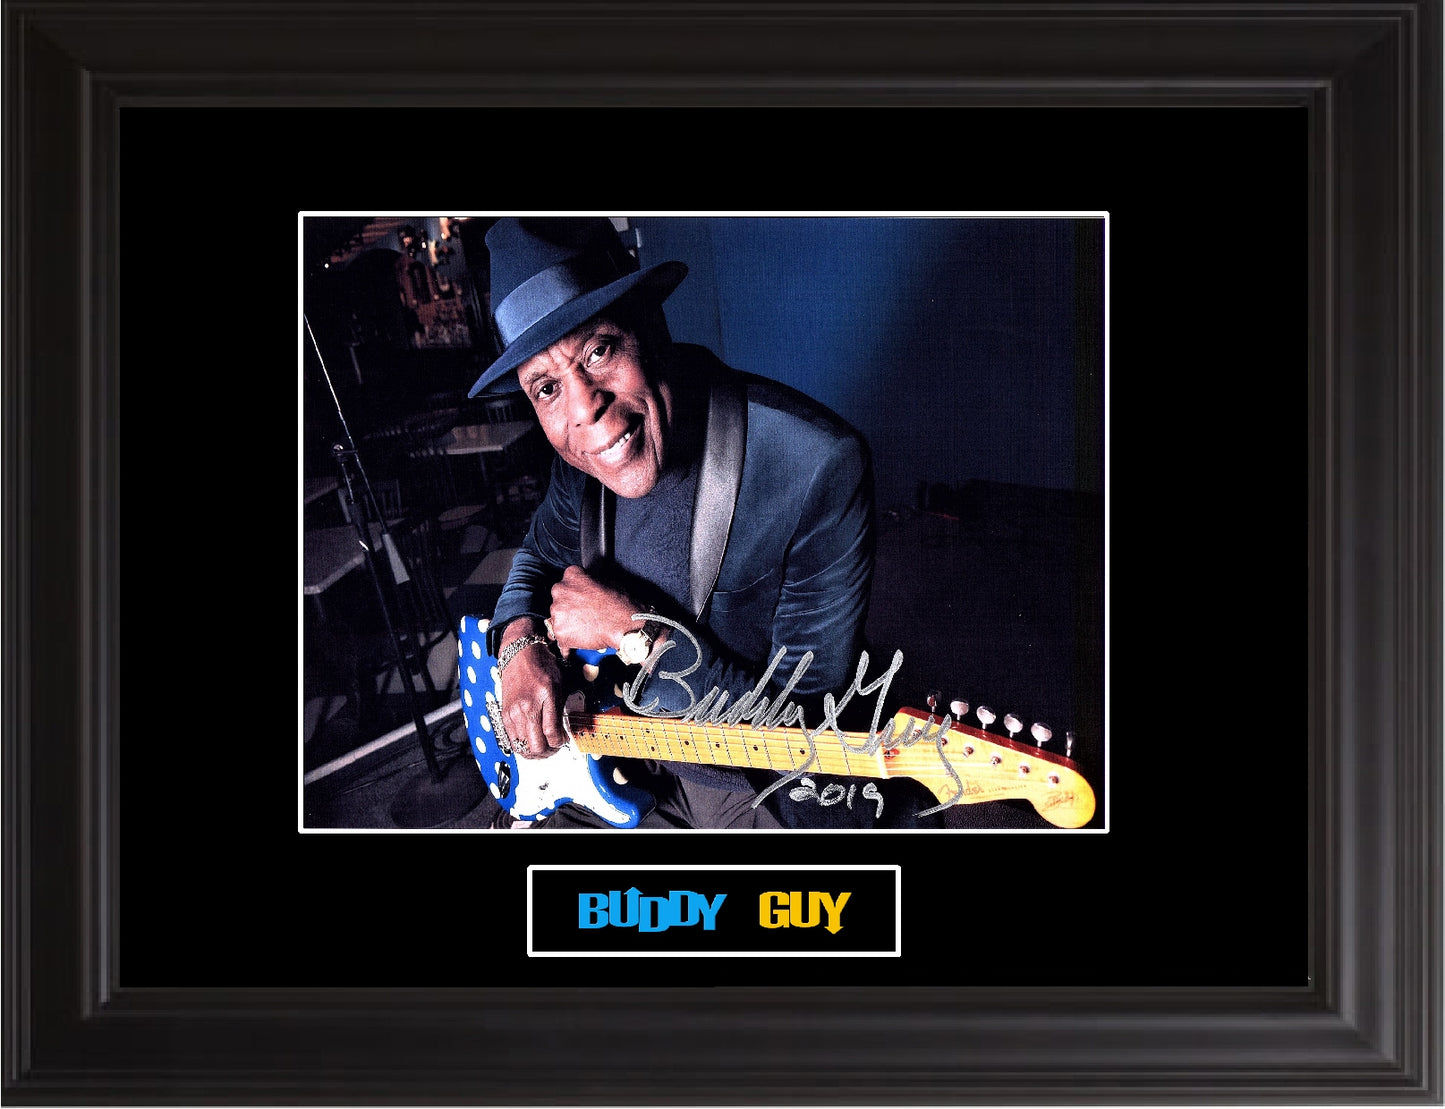 Buddy Guy Autographed Photo - Zion Graphic Collectibles